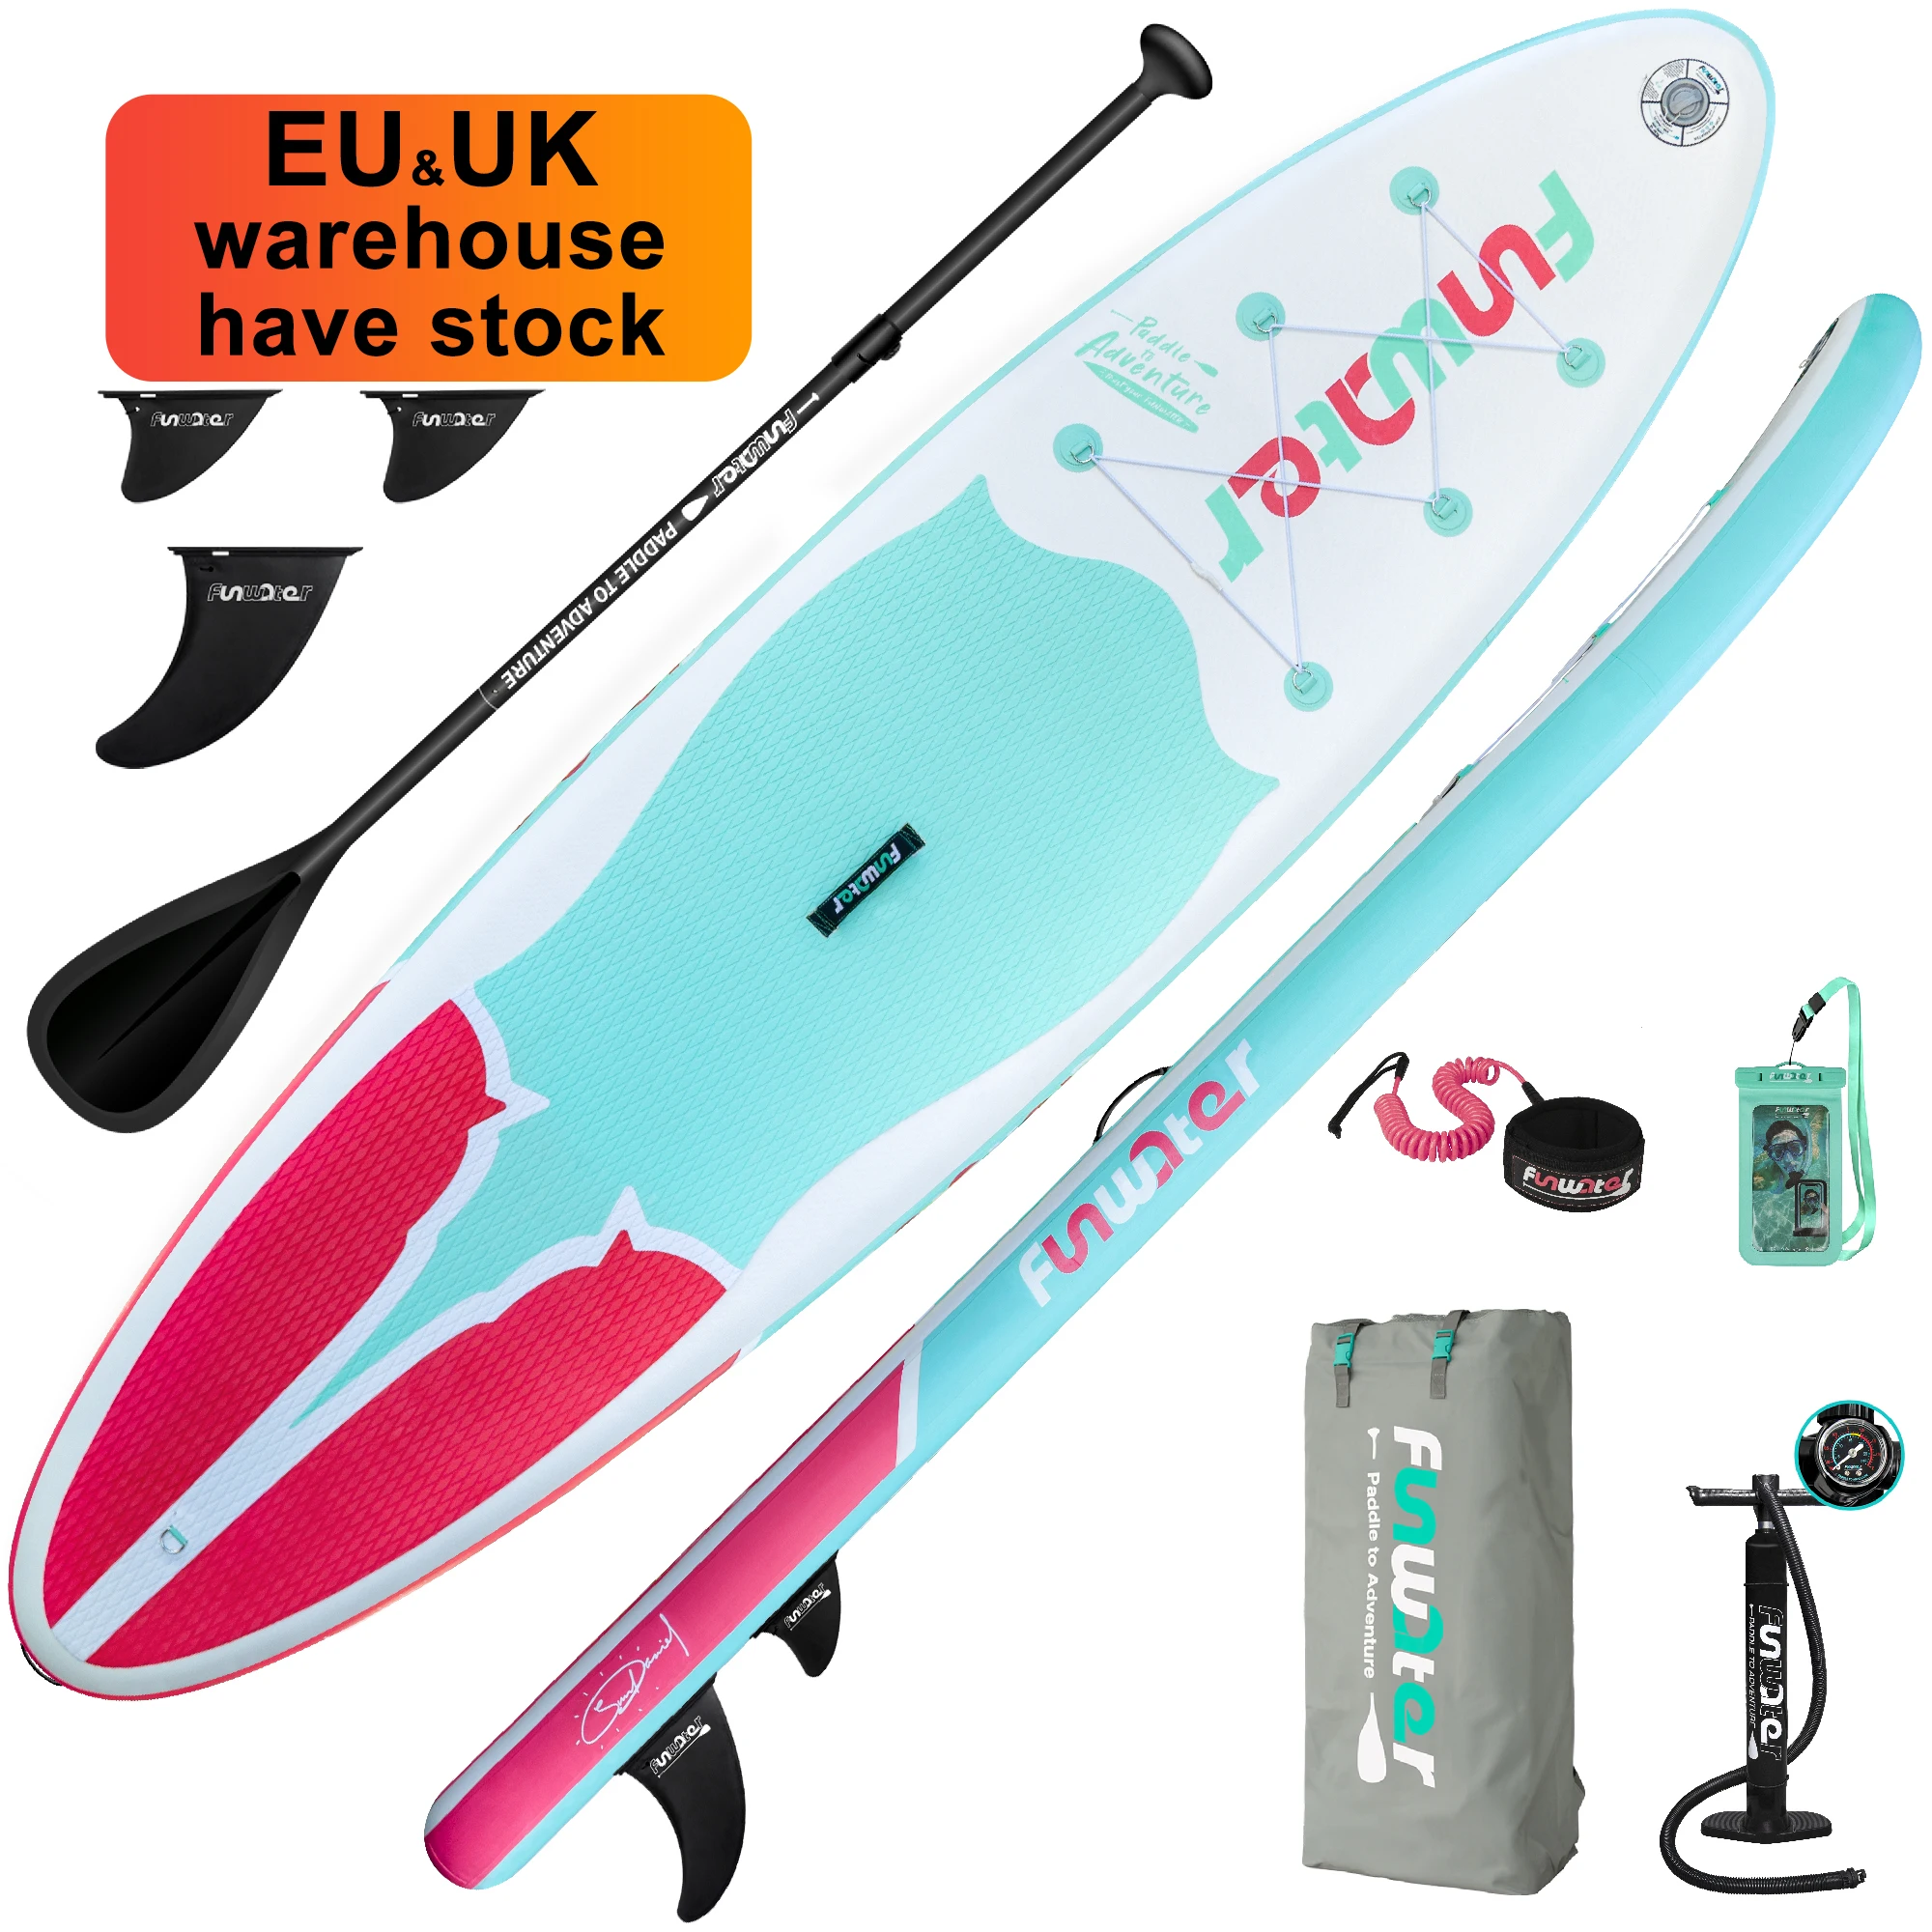 

FUNWATER Dropshipping OEM sup inflatable Paddle Board blue Surfboards paddleboard inflat watersports wakeboard supboard sub surf